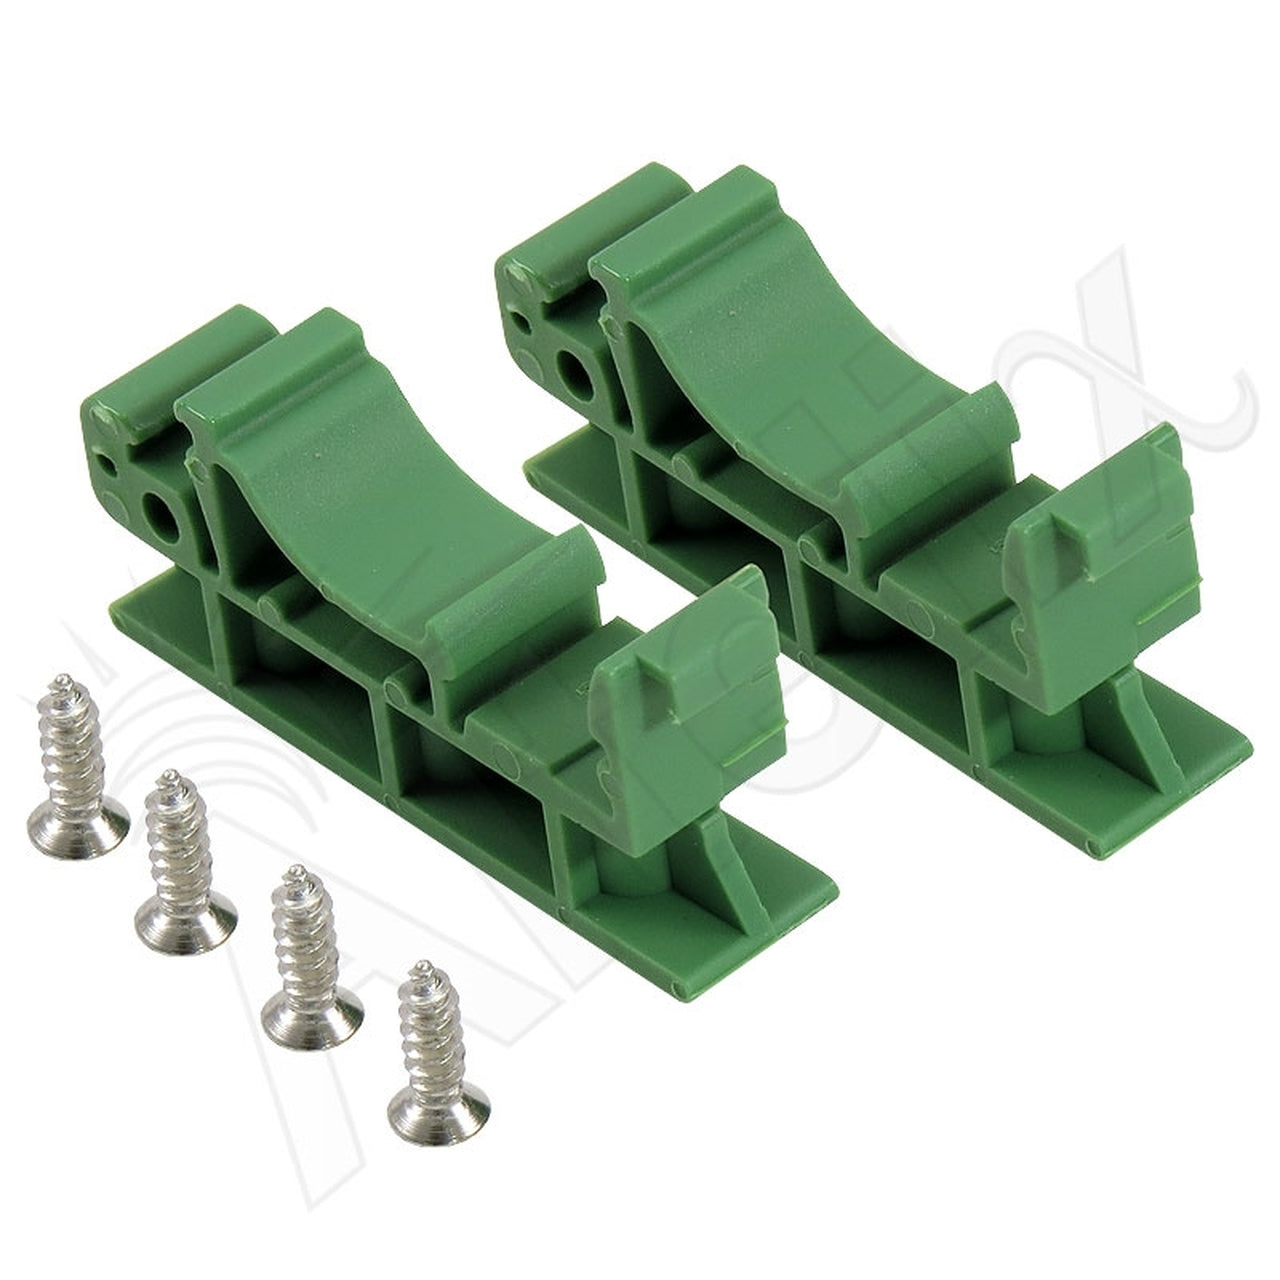 Plastic DIN Rail Mounting Clips 35mm Top Hat or 32mm G-Rail-1